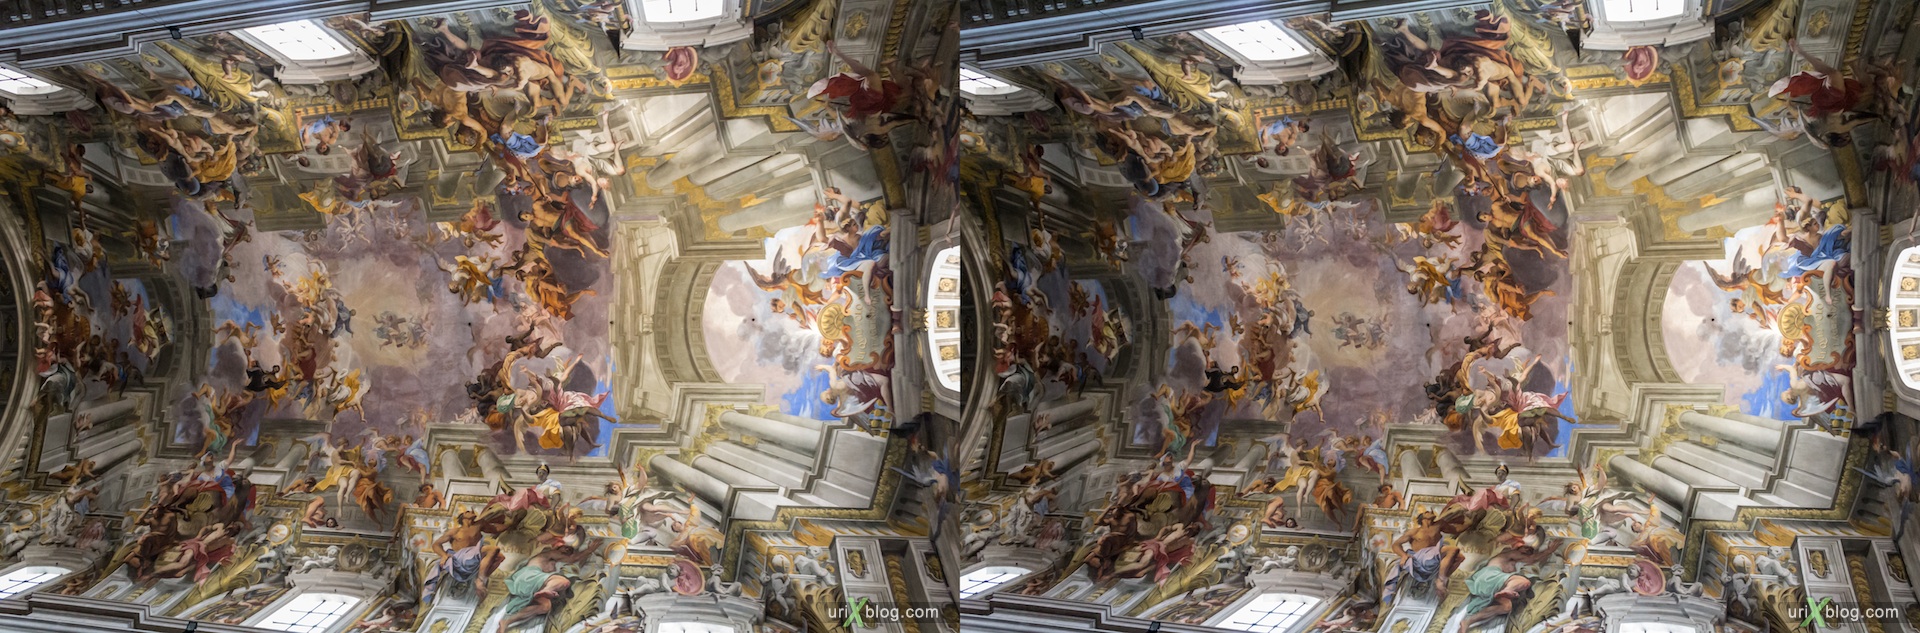 2012, church of Sant'Ignazio, Rome, Italy, cathedral, monastery, Christianity, Catholicism, 3D, stereo pair, cross-eyed, crossview, cross view stereo pair